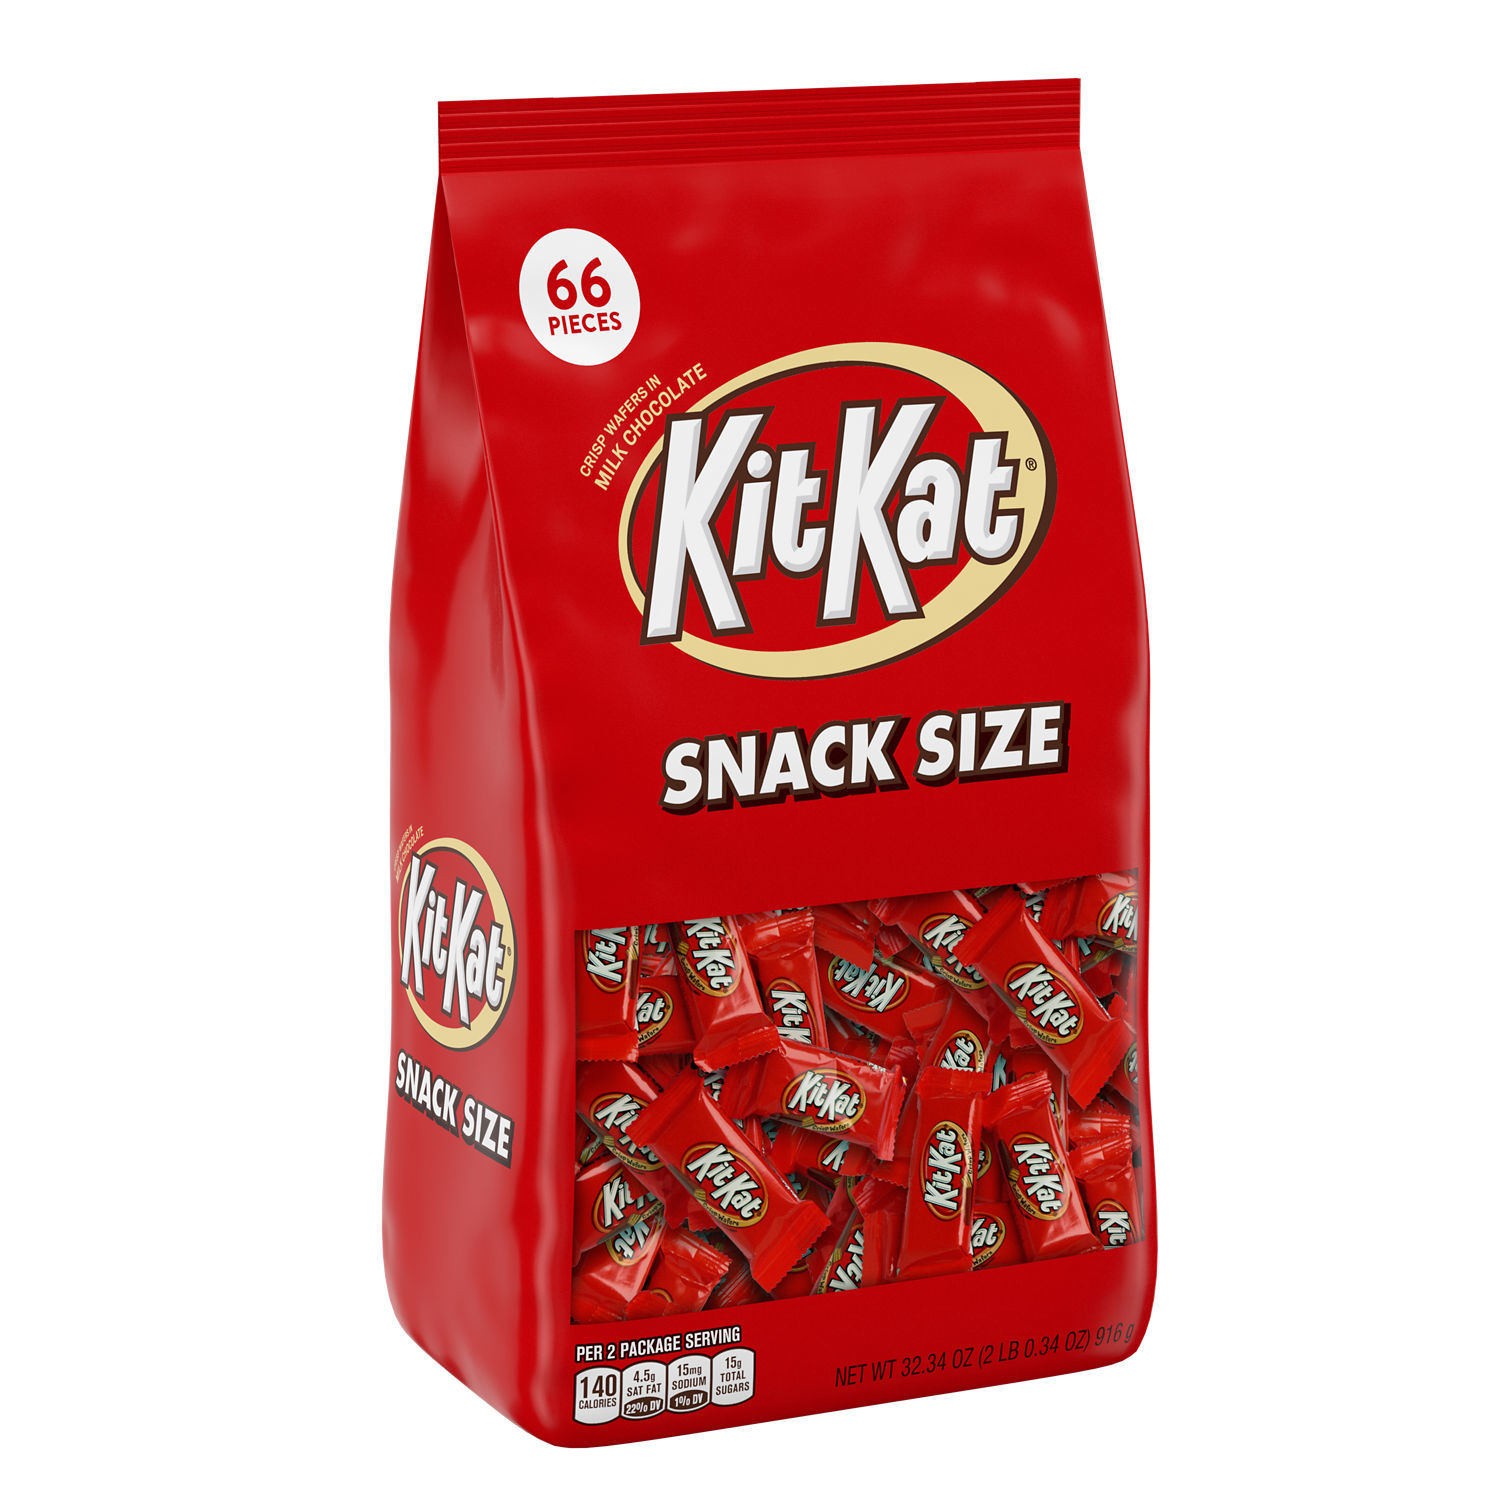 Kit Kat® Milk Chocolate Wafer Snack Size Candy, Bag 32.34 oz, 66 Pieces - image 2 of 9